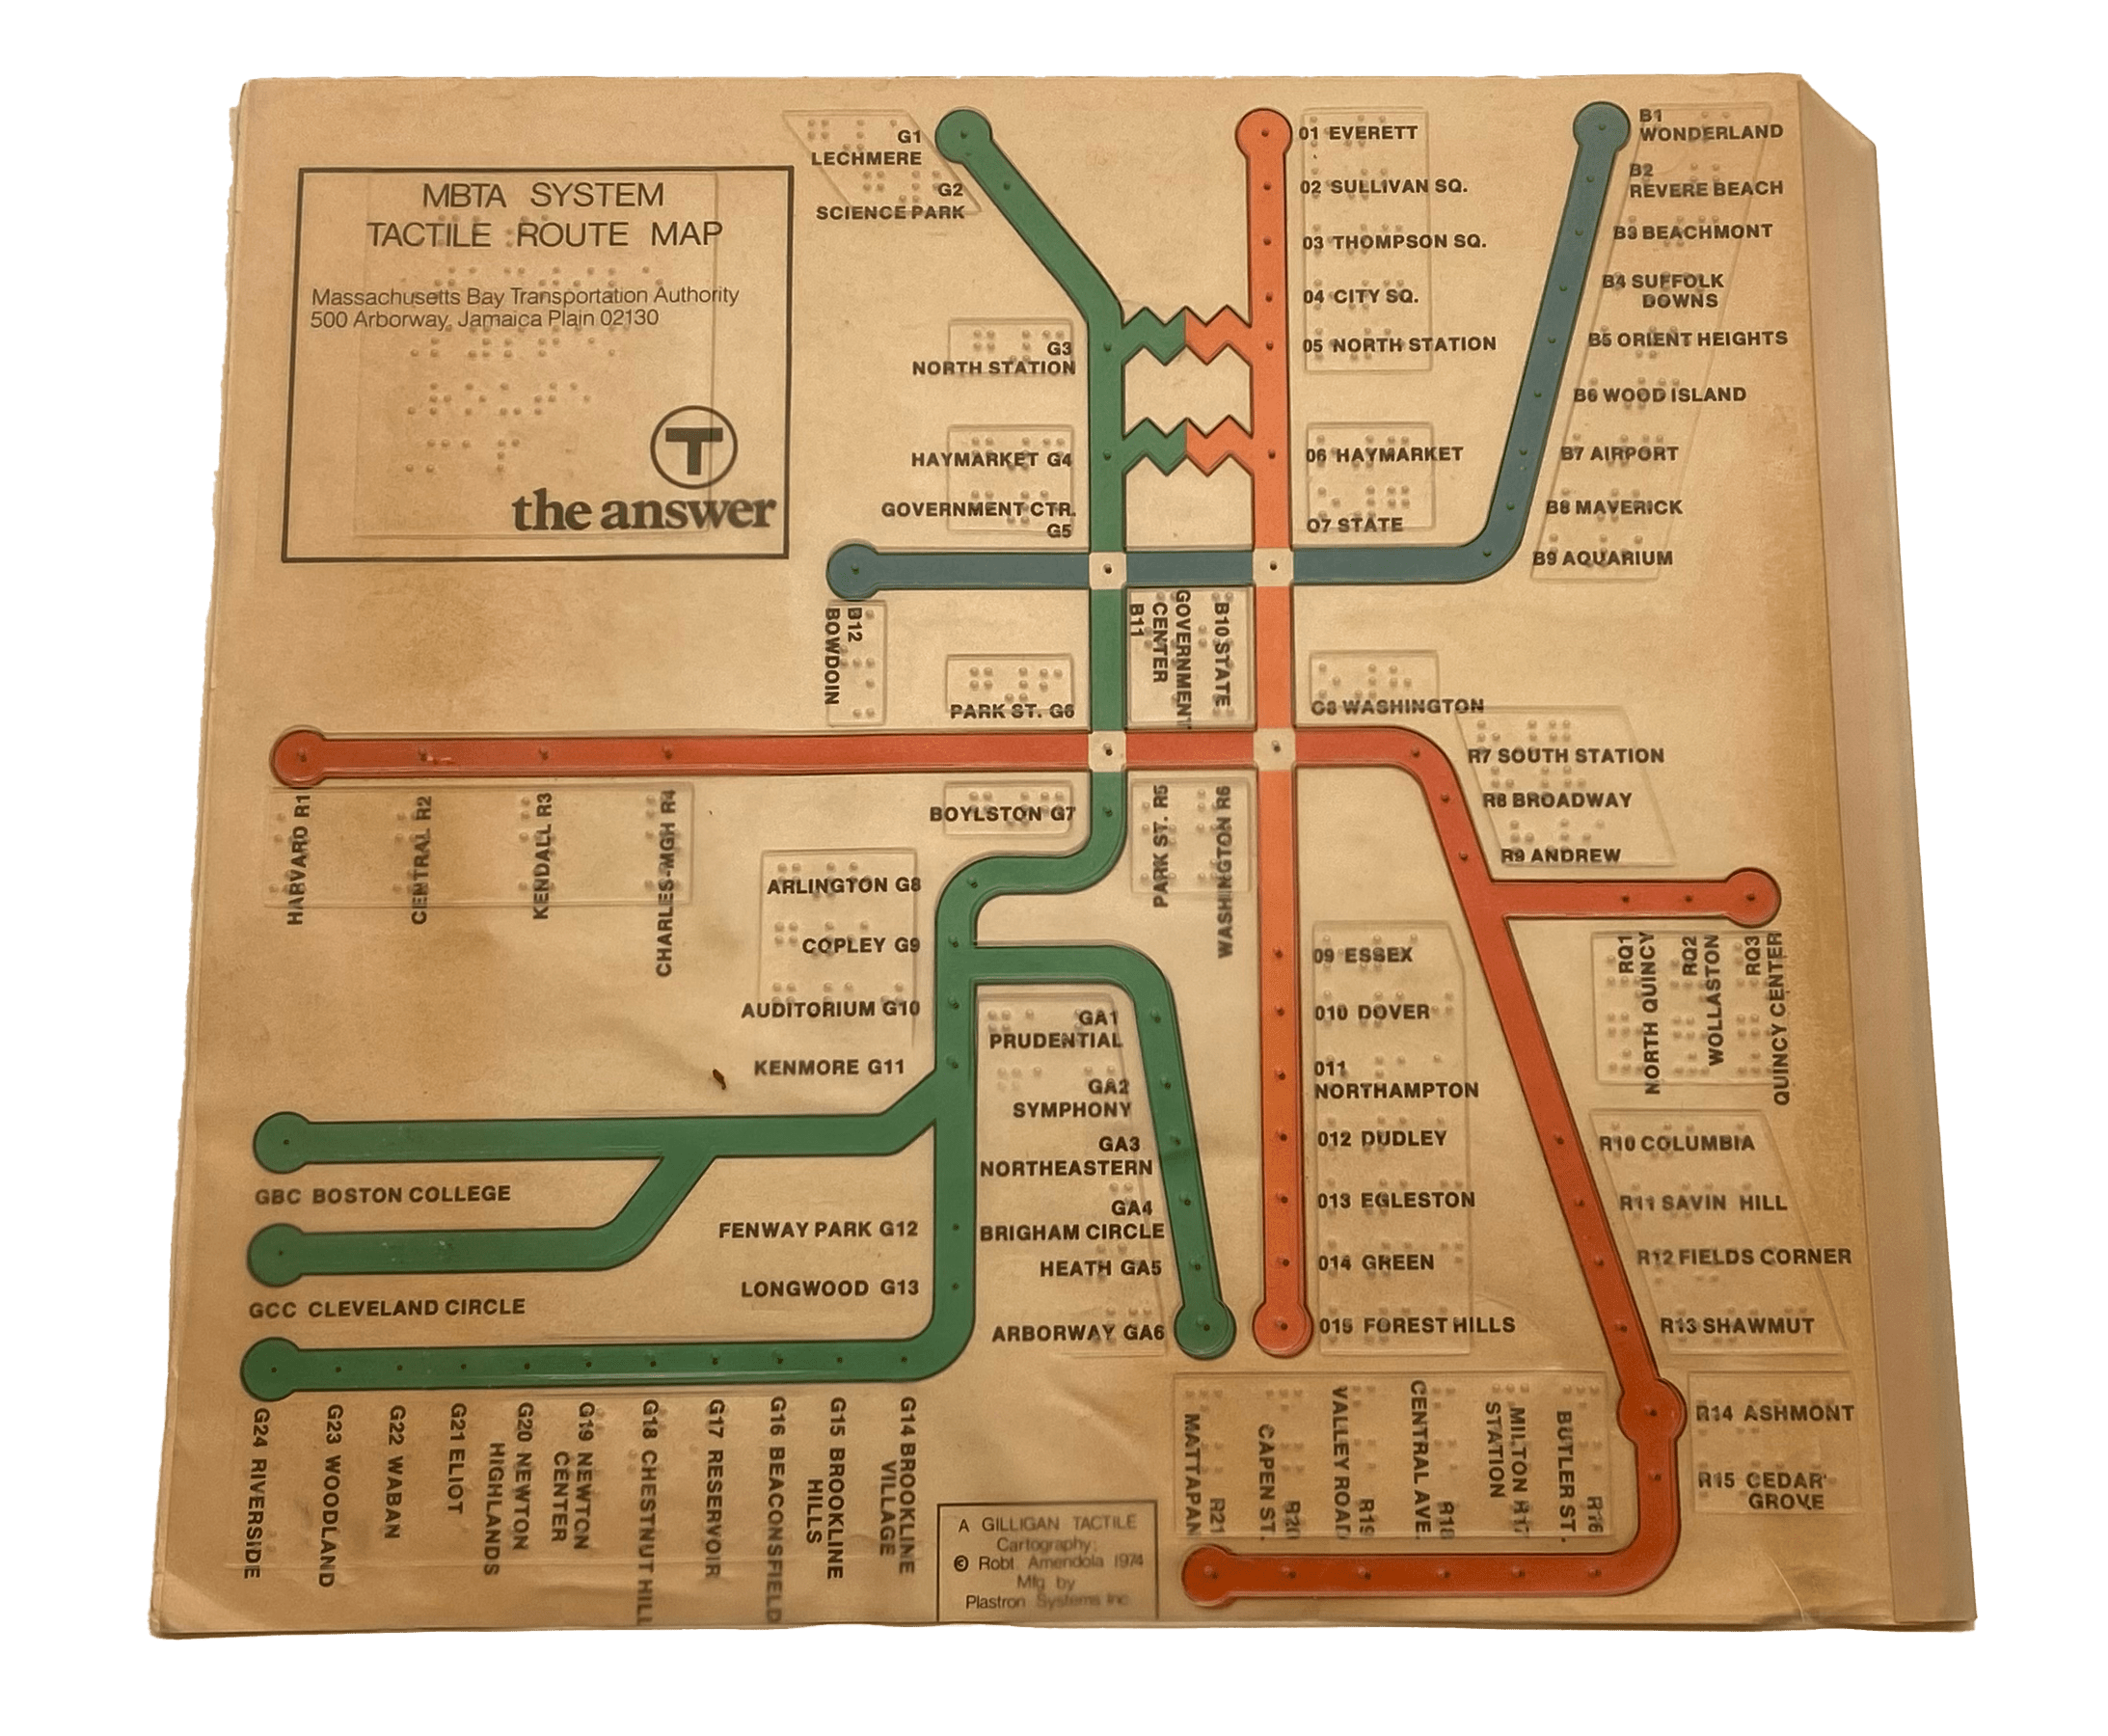 Image of MBTA System Tactile Route Map